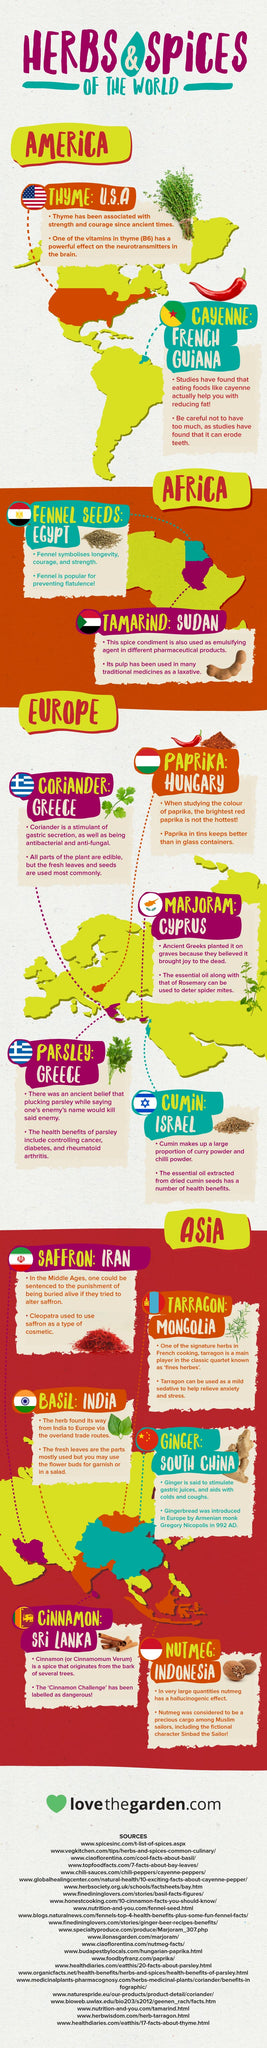 Herbs and Spices Infographic 